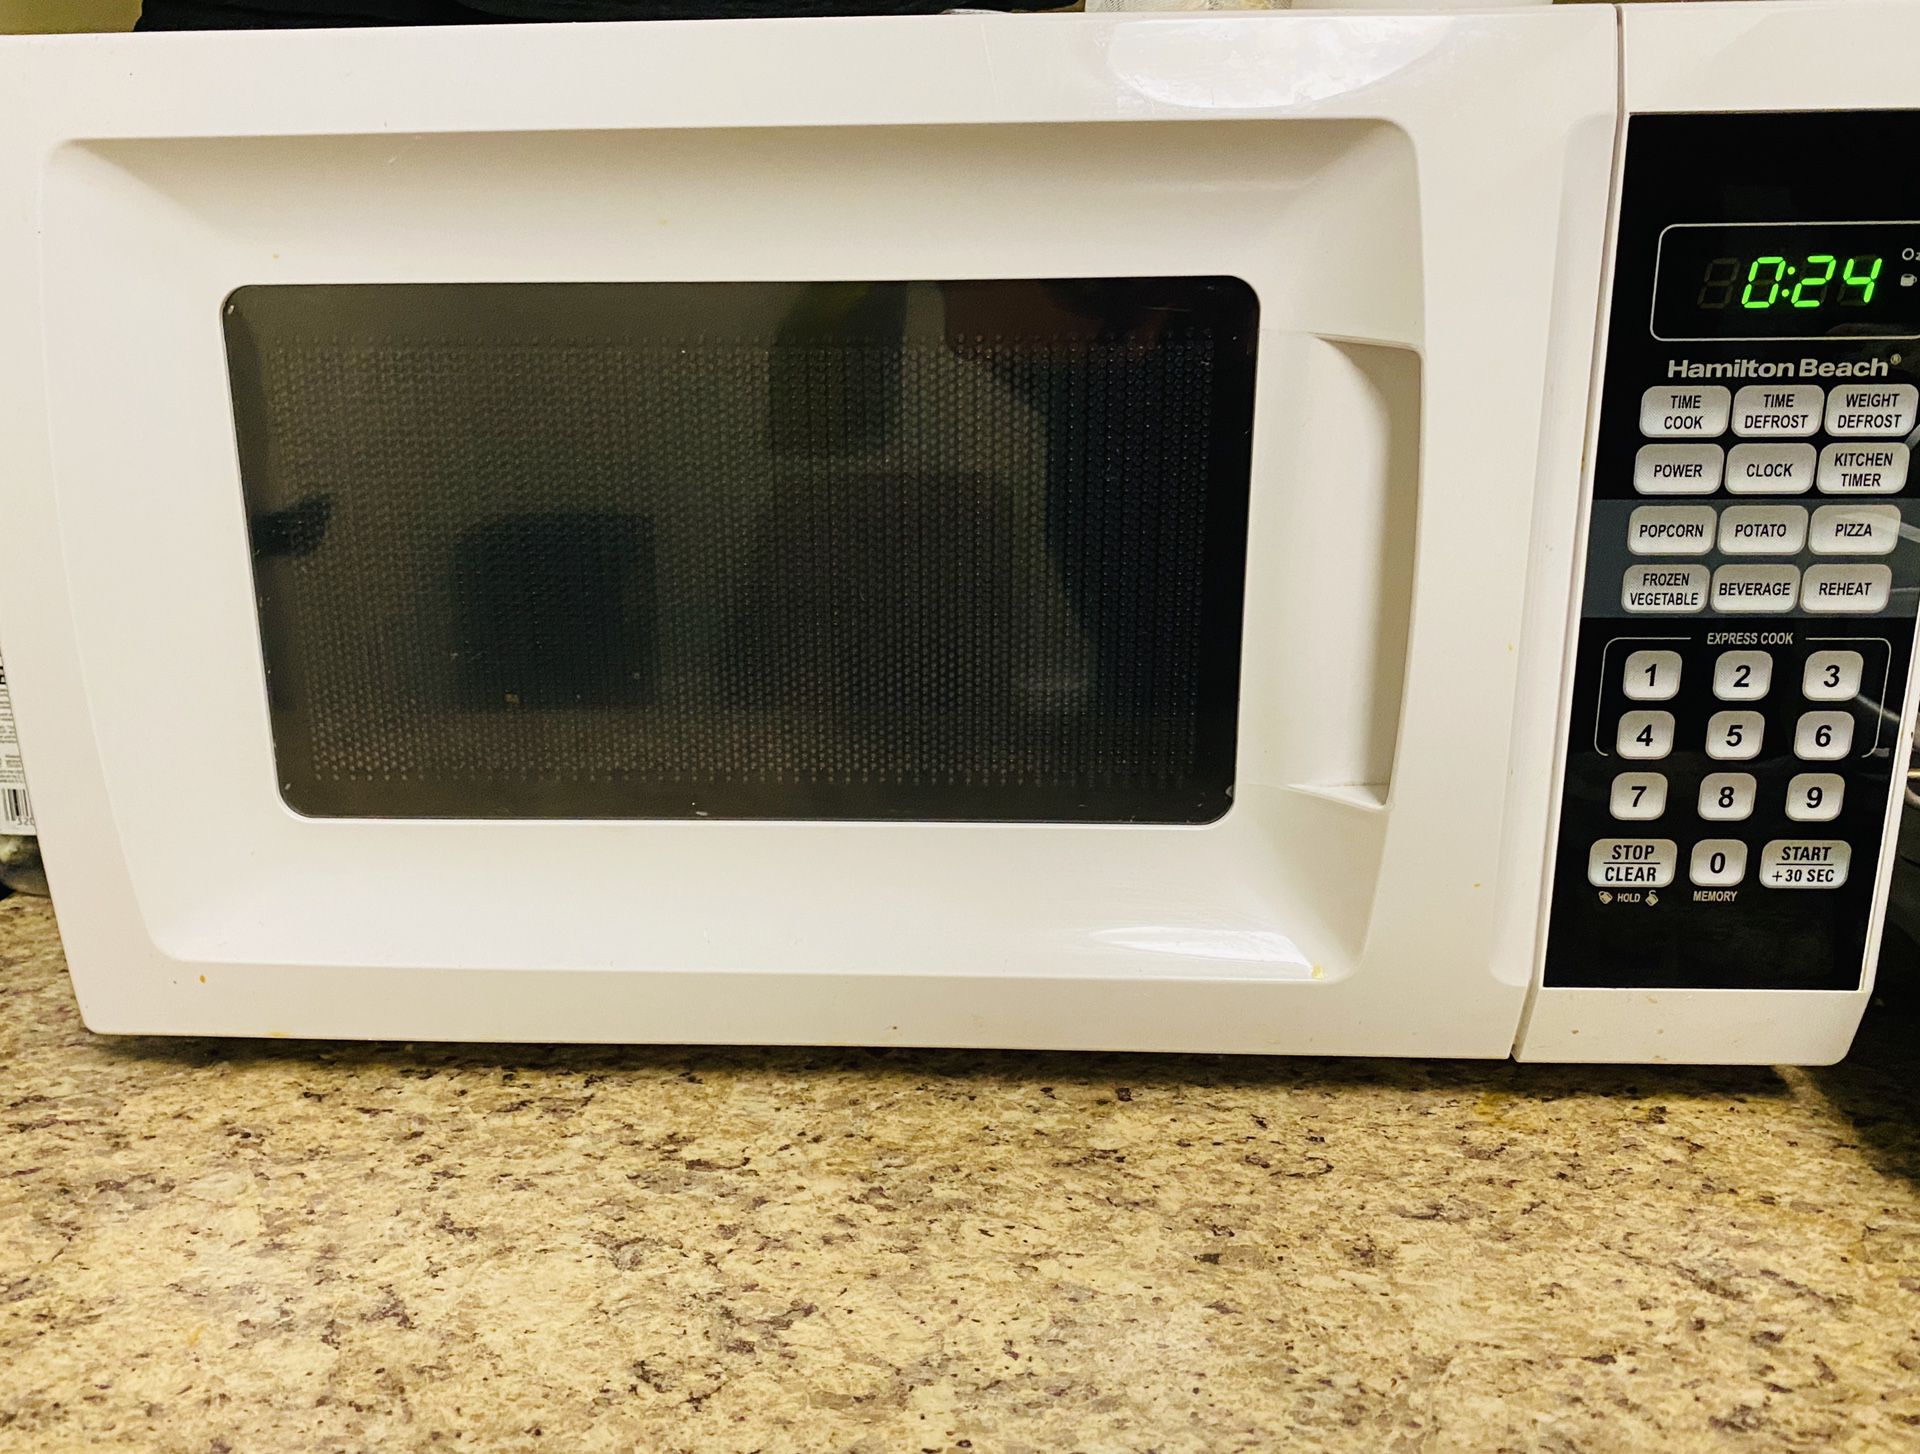 Hamilton beach microwave. White and in great condition!